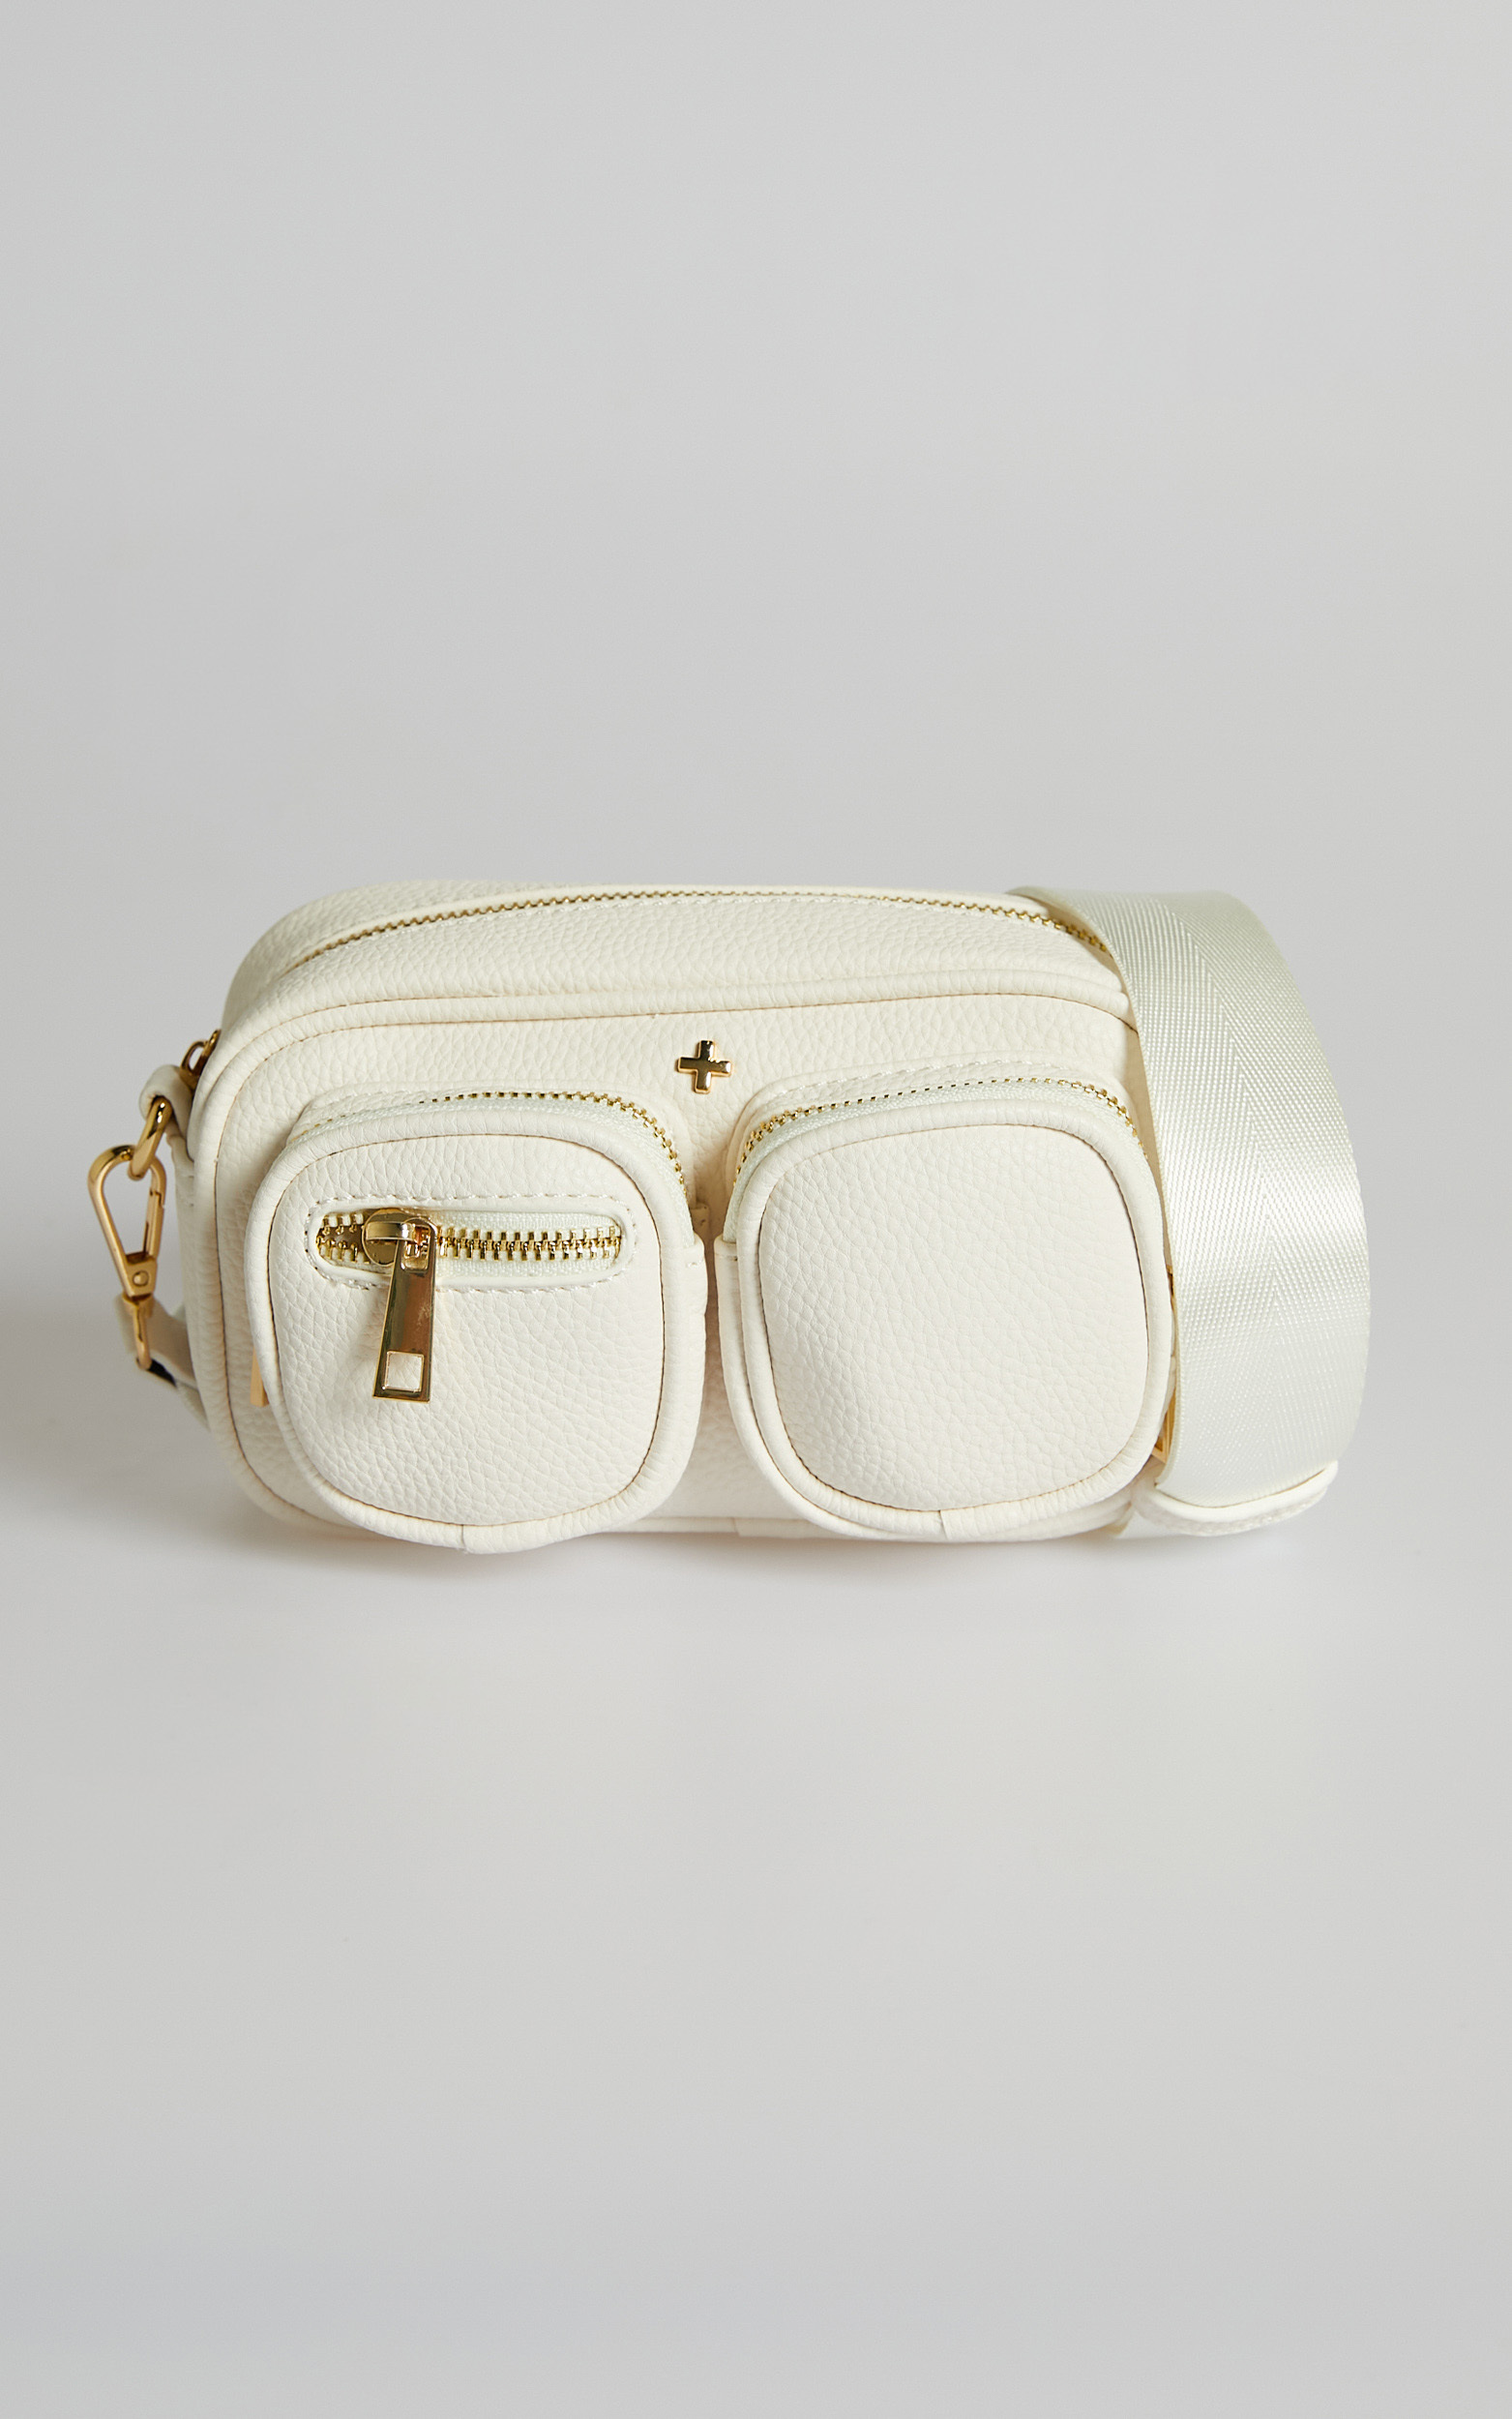 Peta And Jain - Lala Bag in White PU - NoSize, WHT1, hi-res image number null